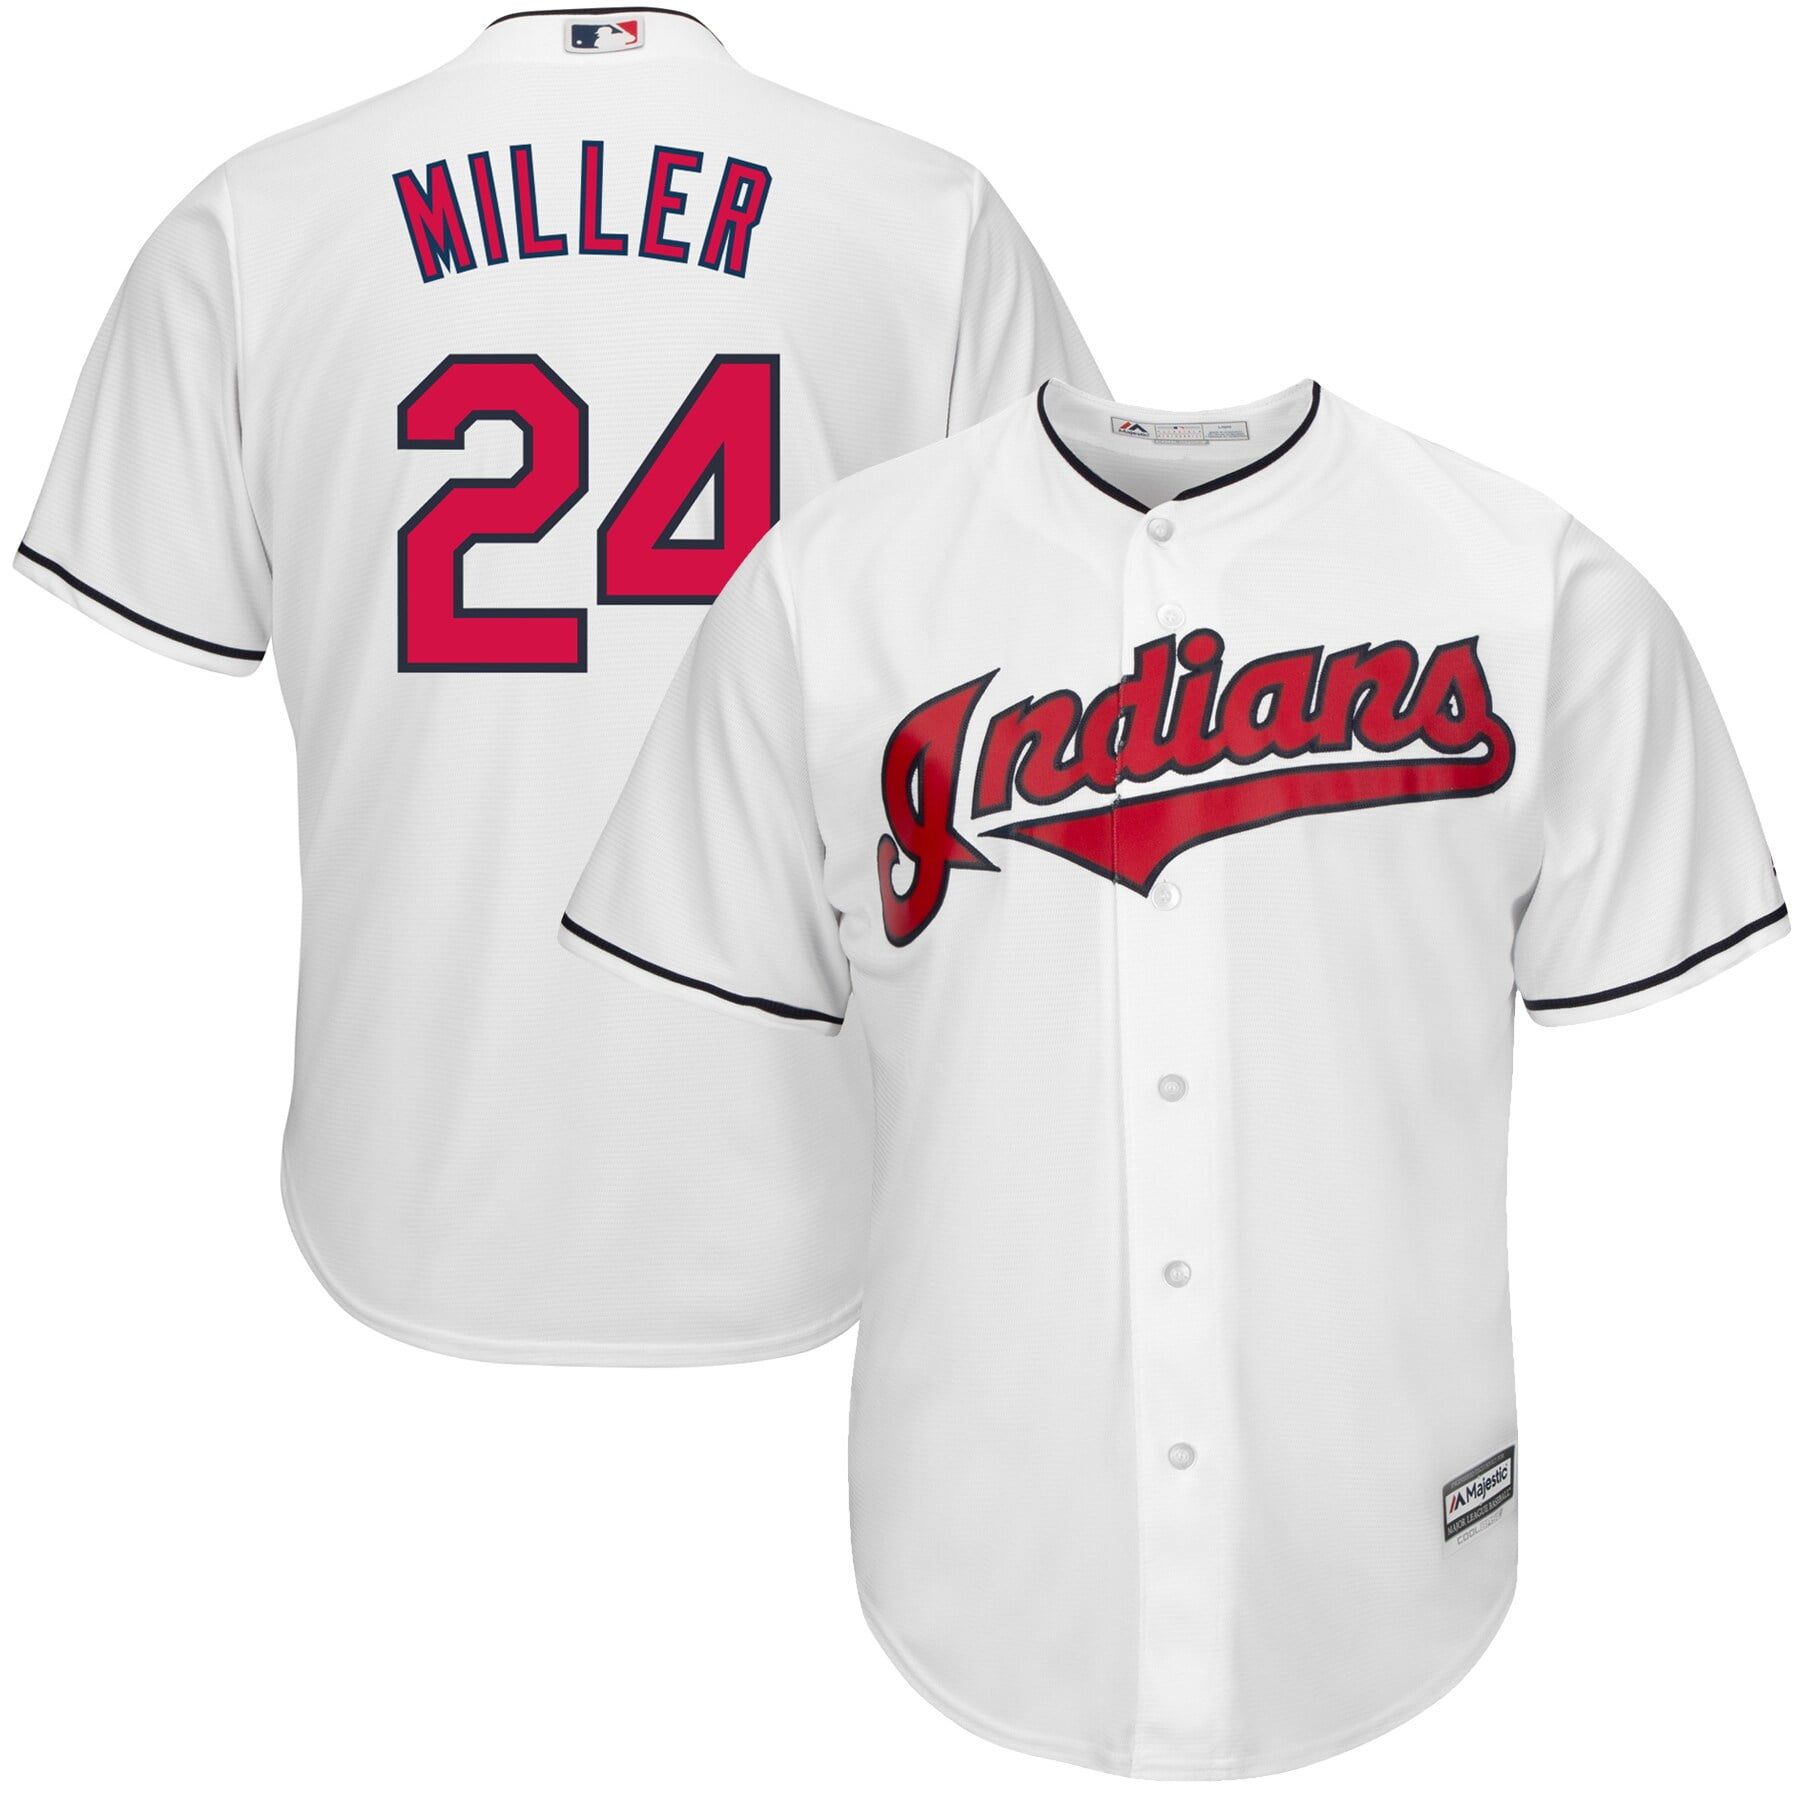 indians white jersey